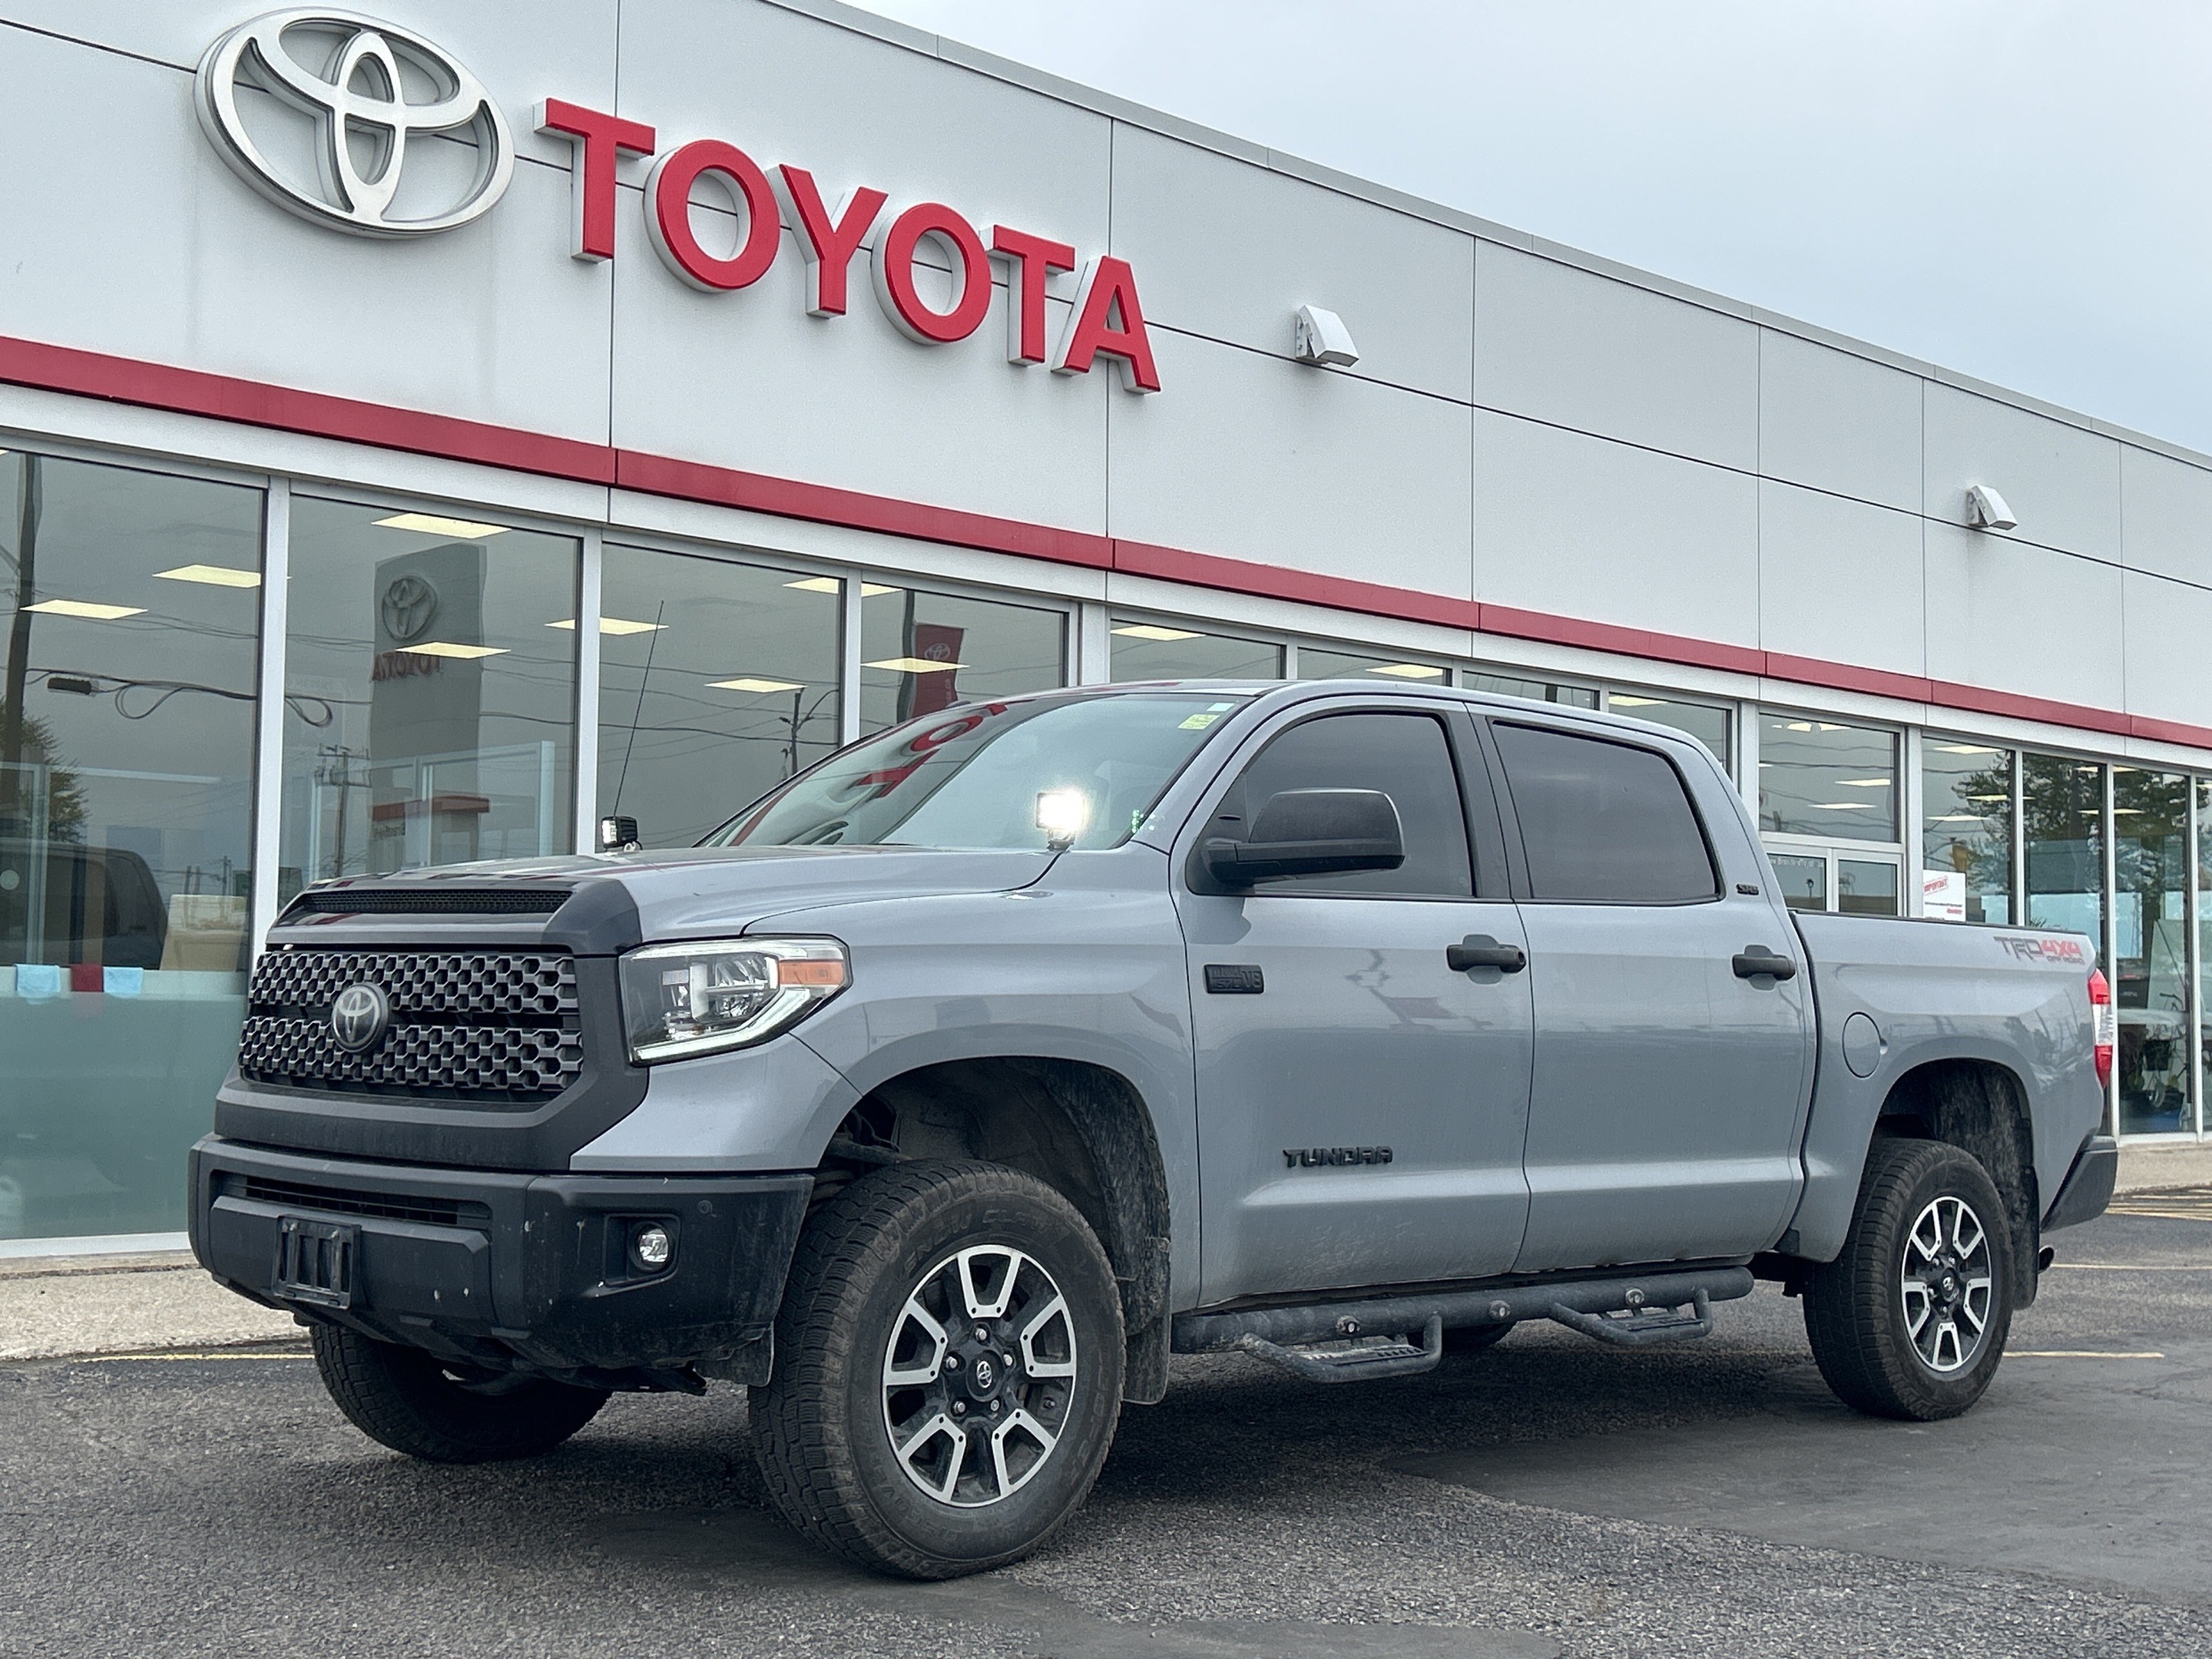 2018 Toyota Tundra TRD OFF ROAD PACKAGE - FREE TONNEAU AND SIDE STEPS